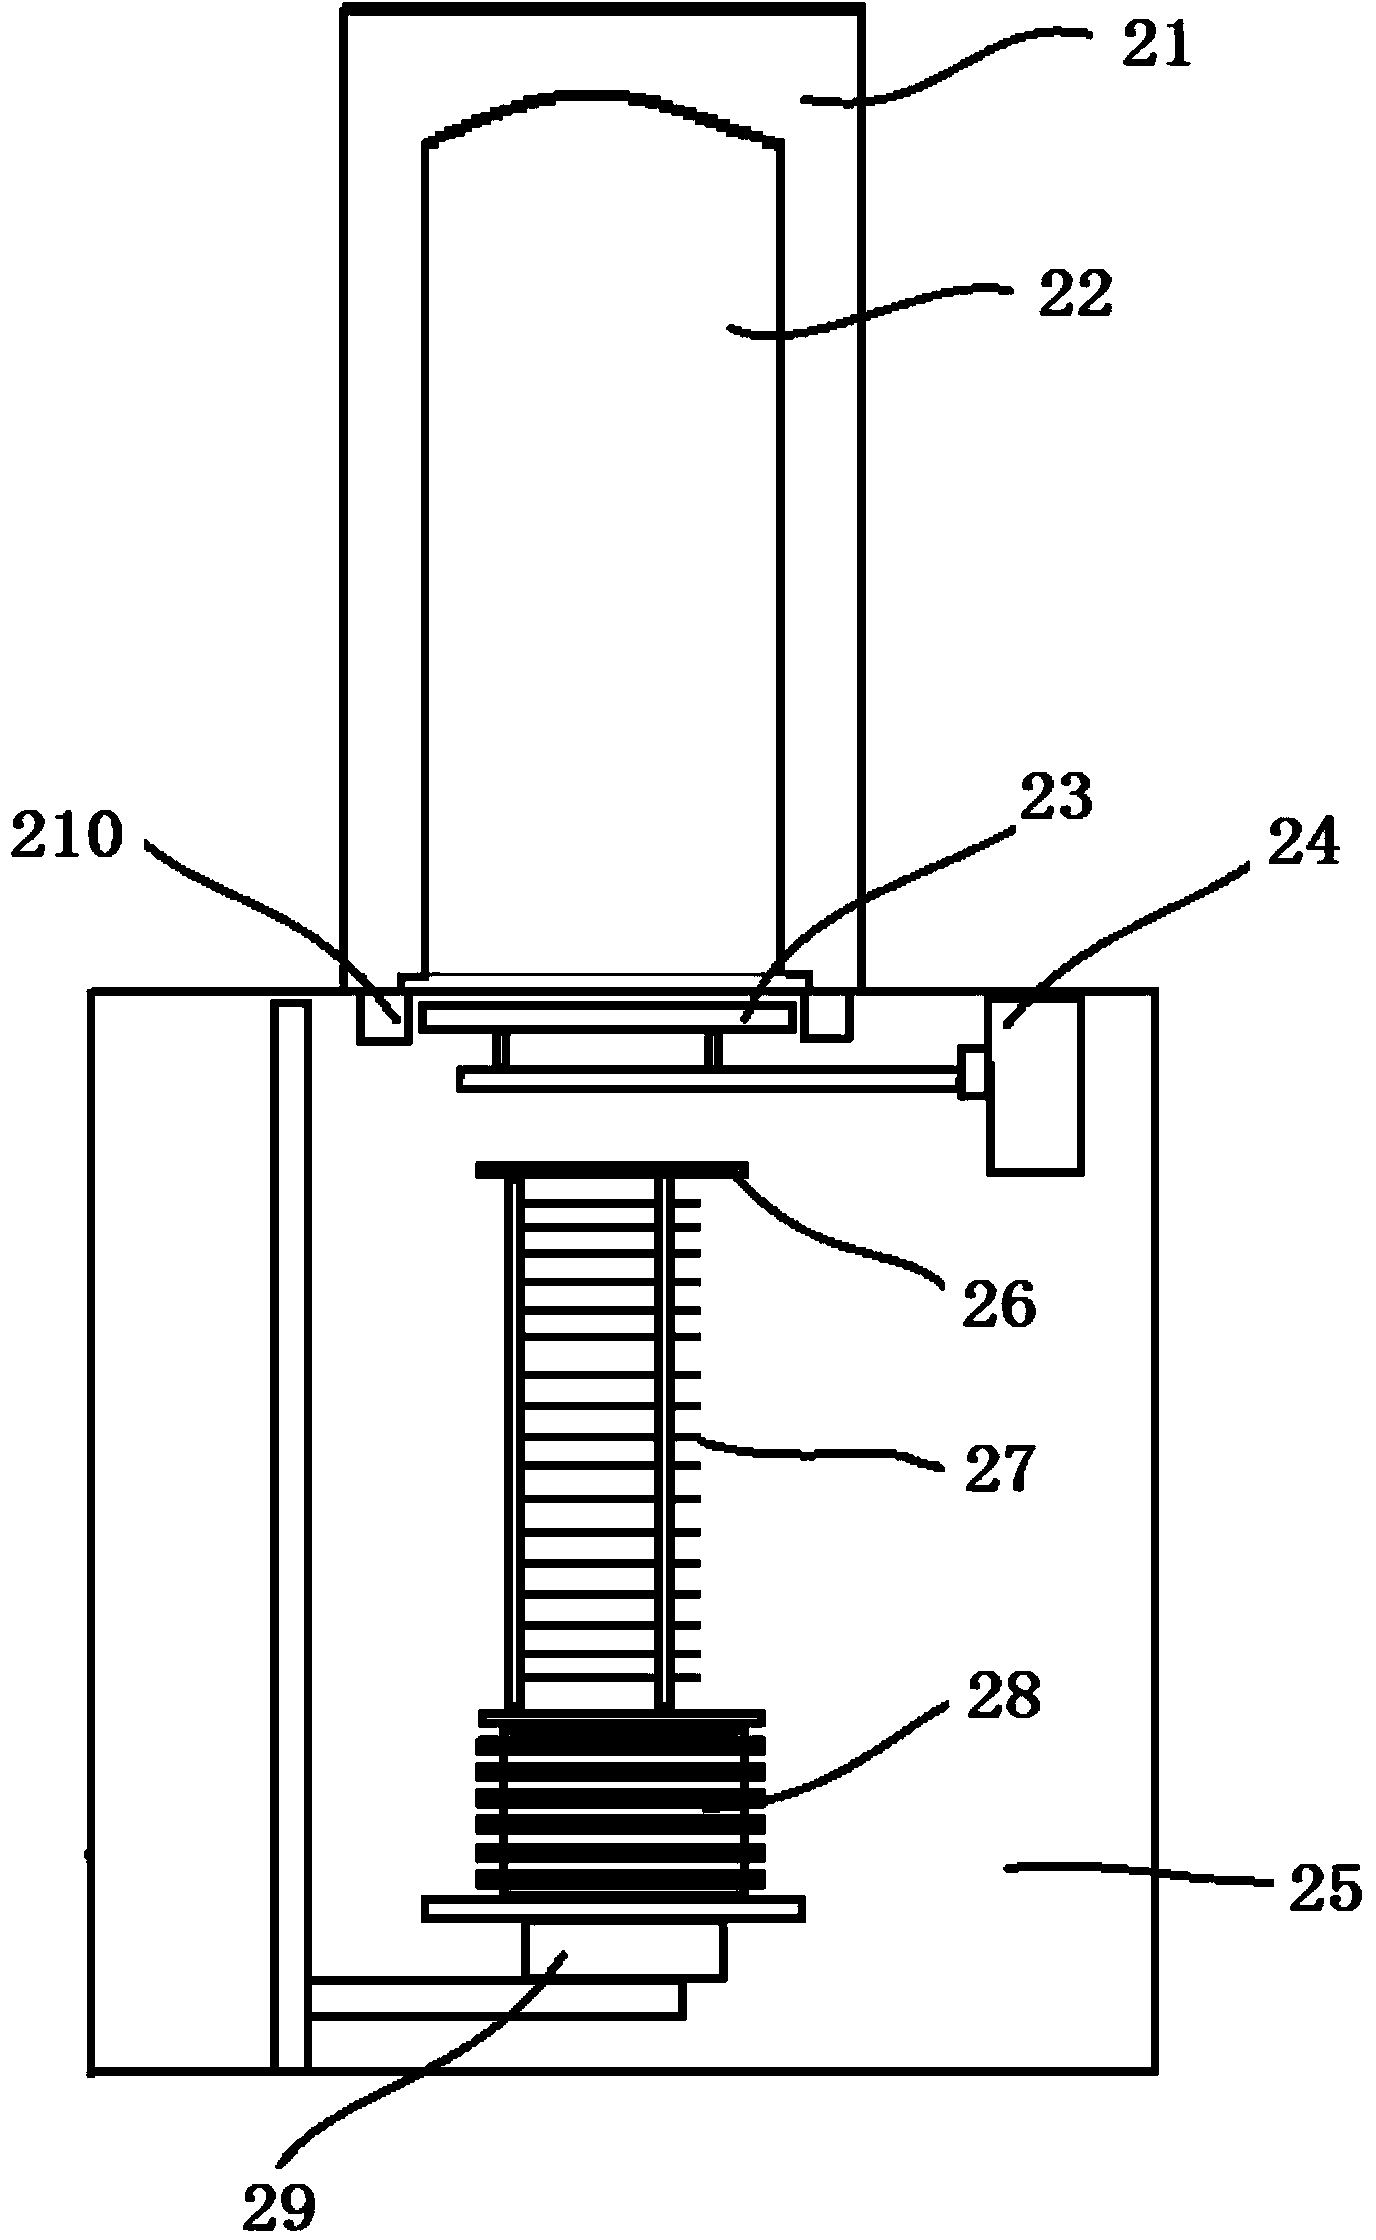 Mechanism capable of realizing lifting and rotating integrated movement of furnace door